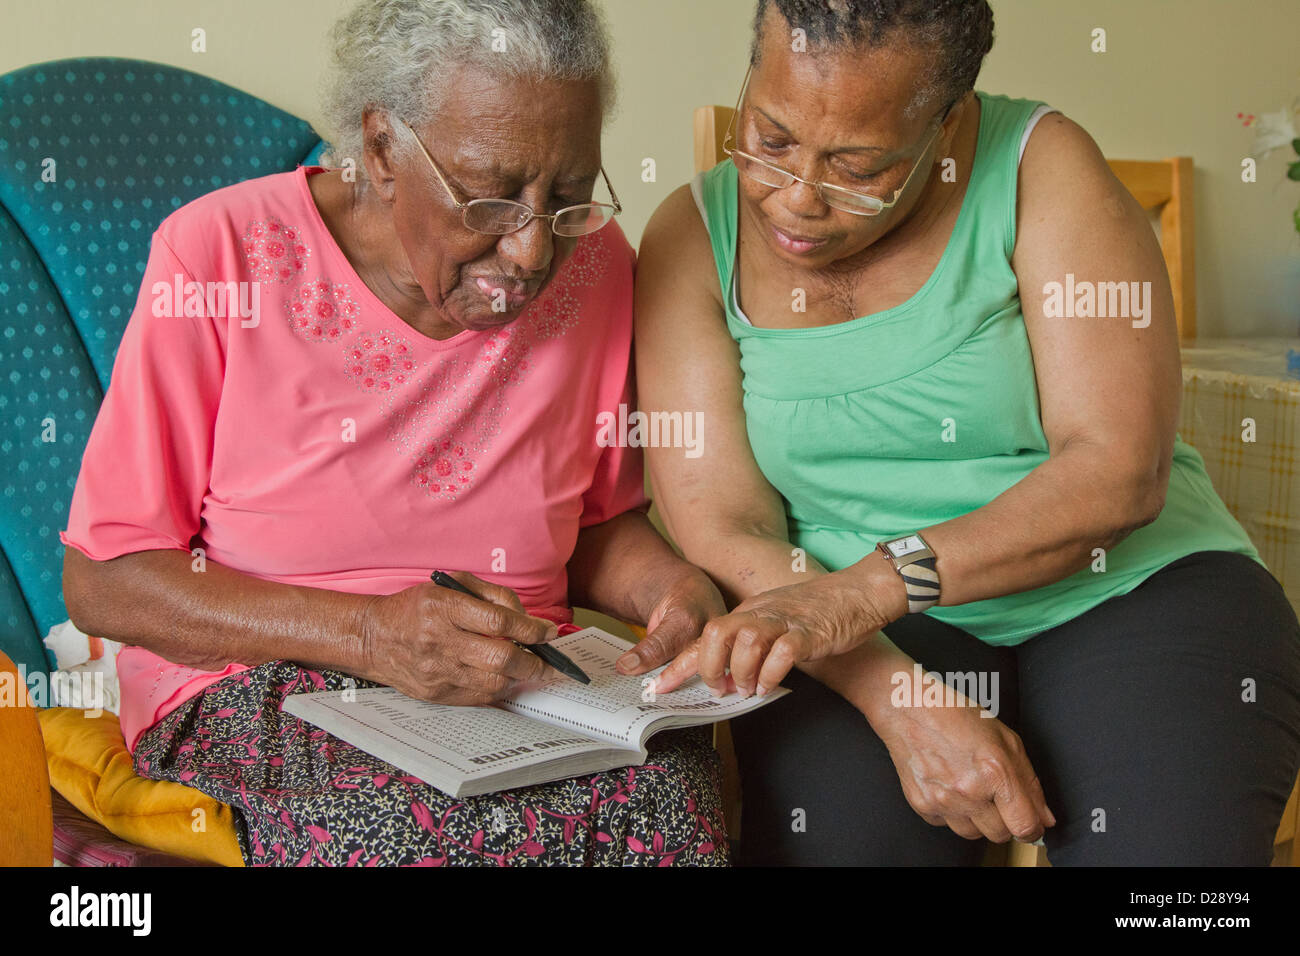 Carer and elderly visually impaired woman solving crossword. Stock Photo